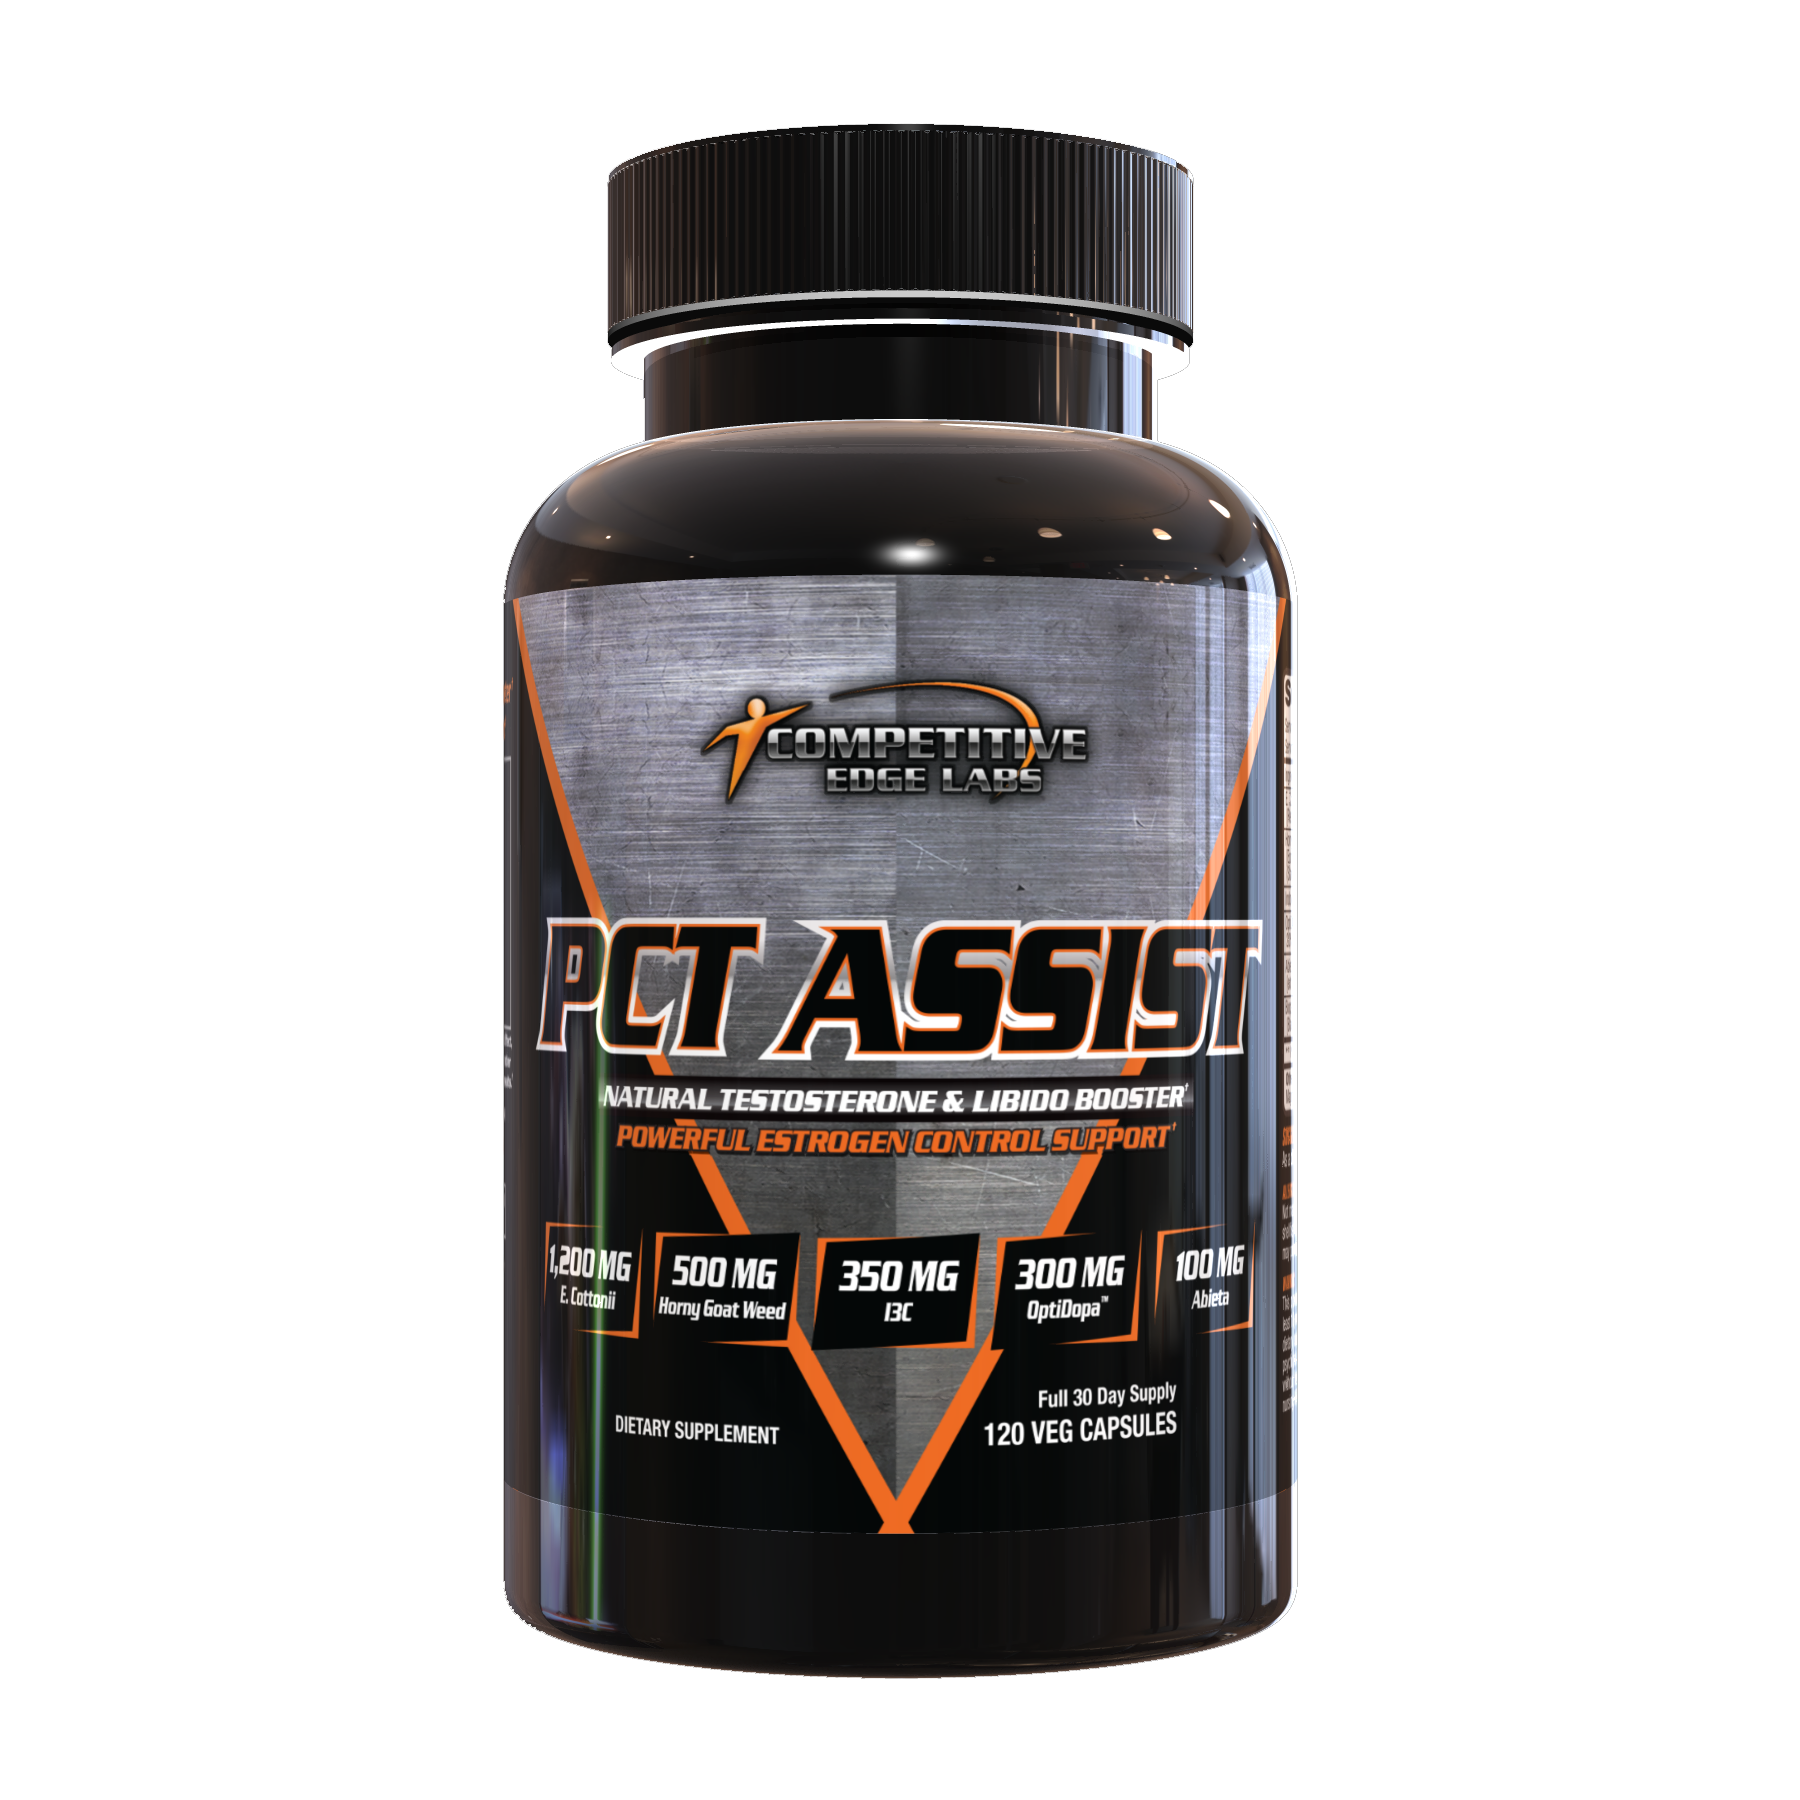 Competitive Edge Labs PCT Assist - A1 Supplements Store